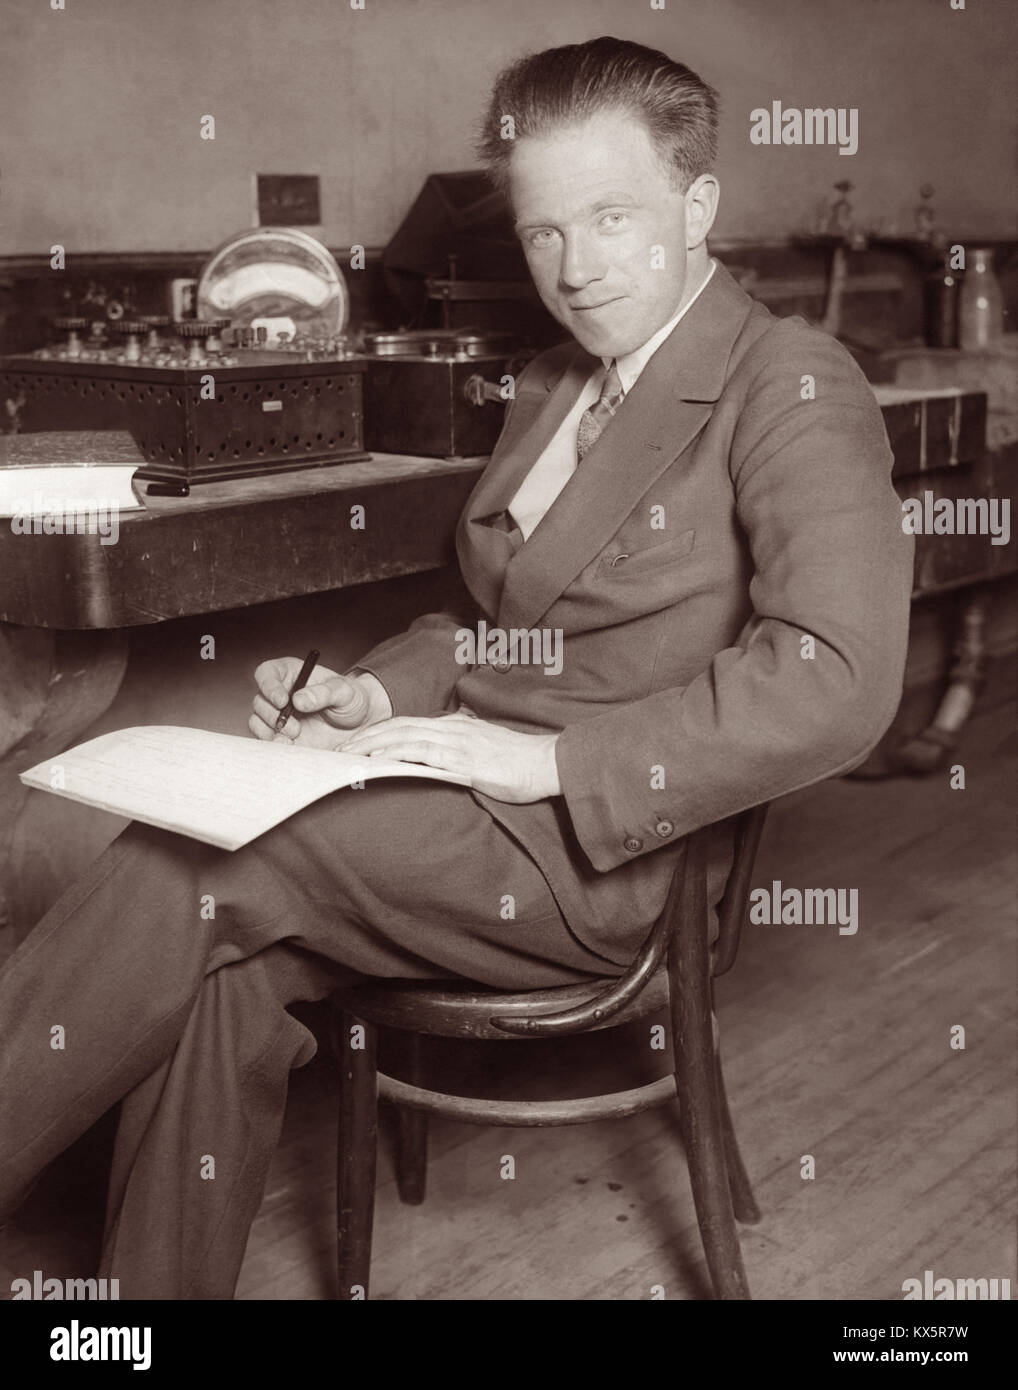 Werner Heisenberg (1901 -1976), German theoretical physicist and a key pioneer of quantum mechanics, won the 1932 Nobel Prize in Physics for his theory and applications of quantum mechanics. Stock Photo